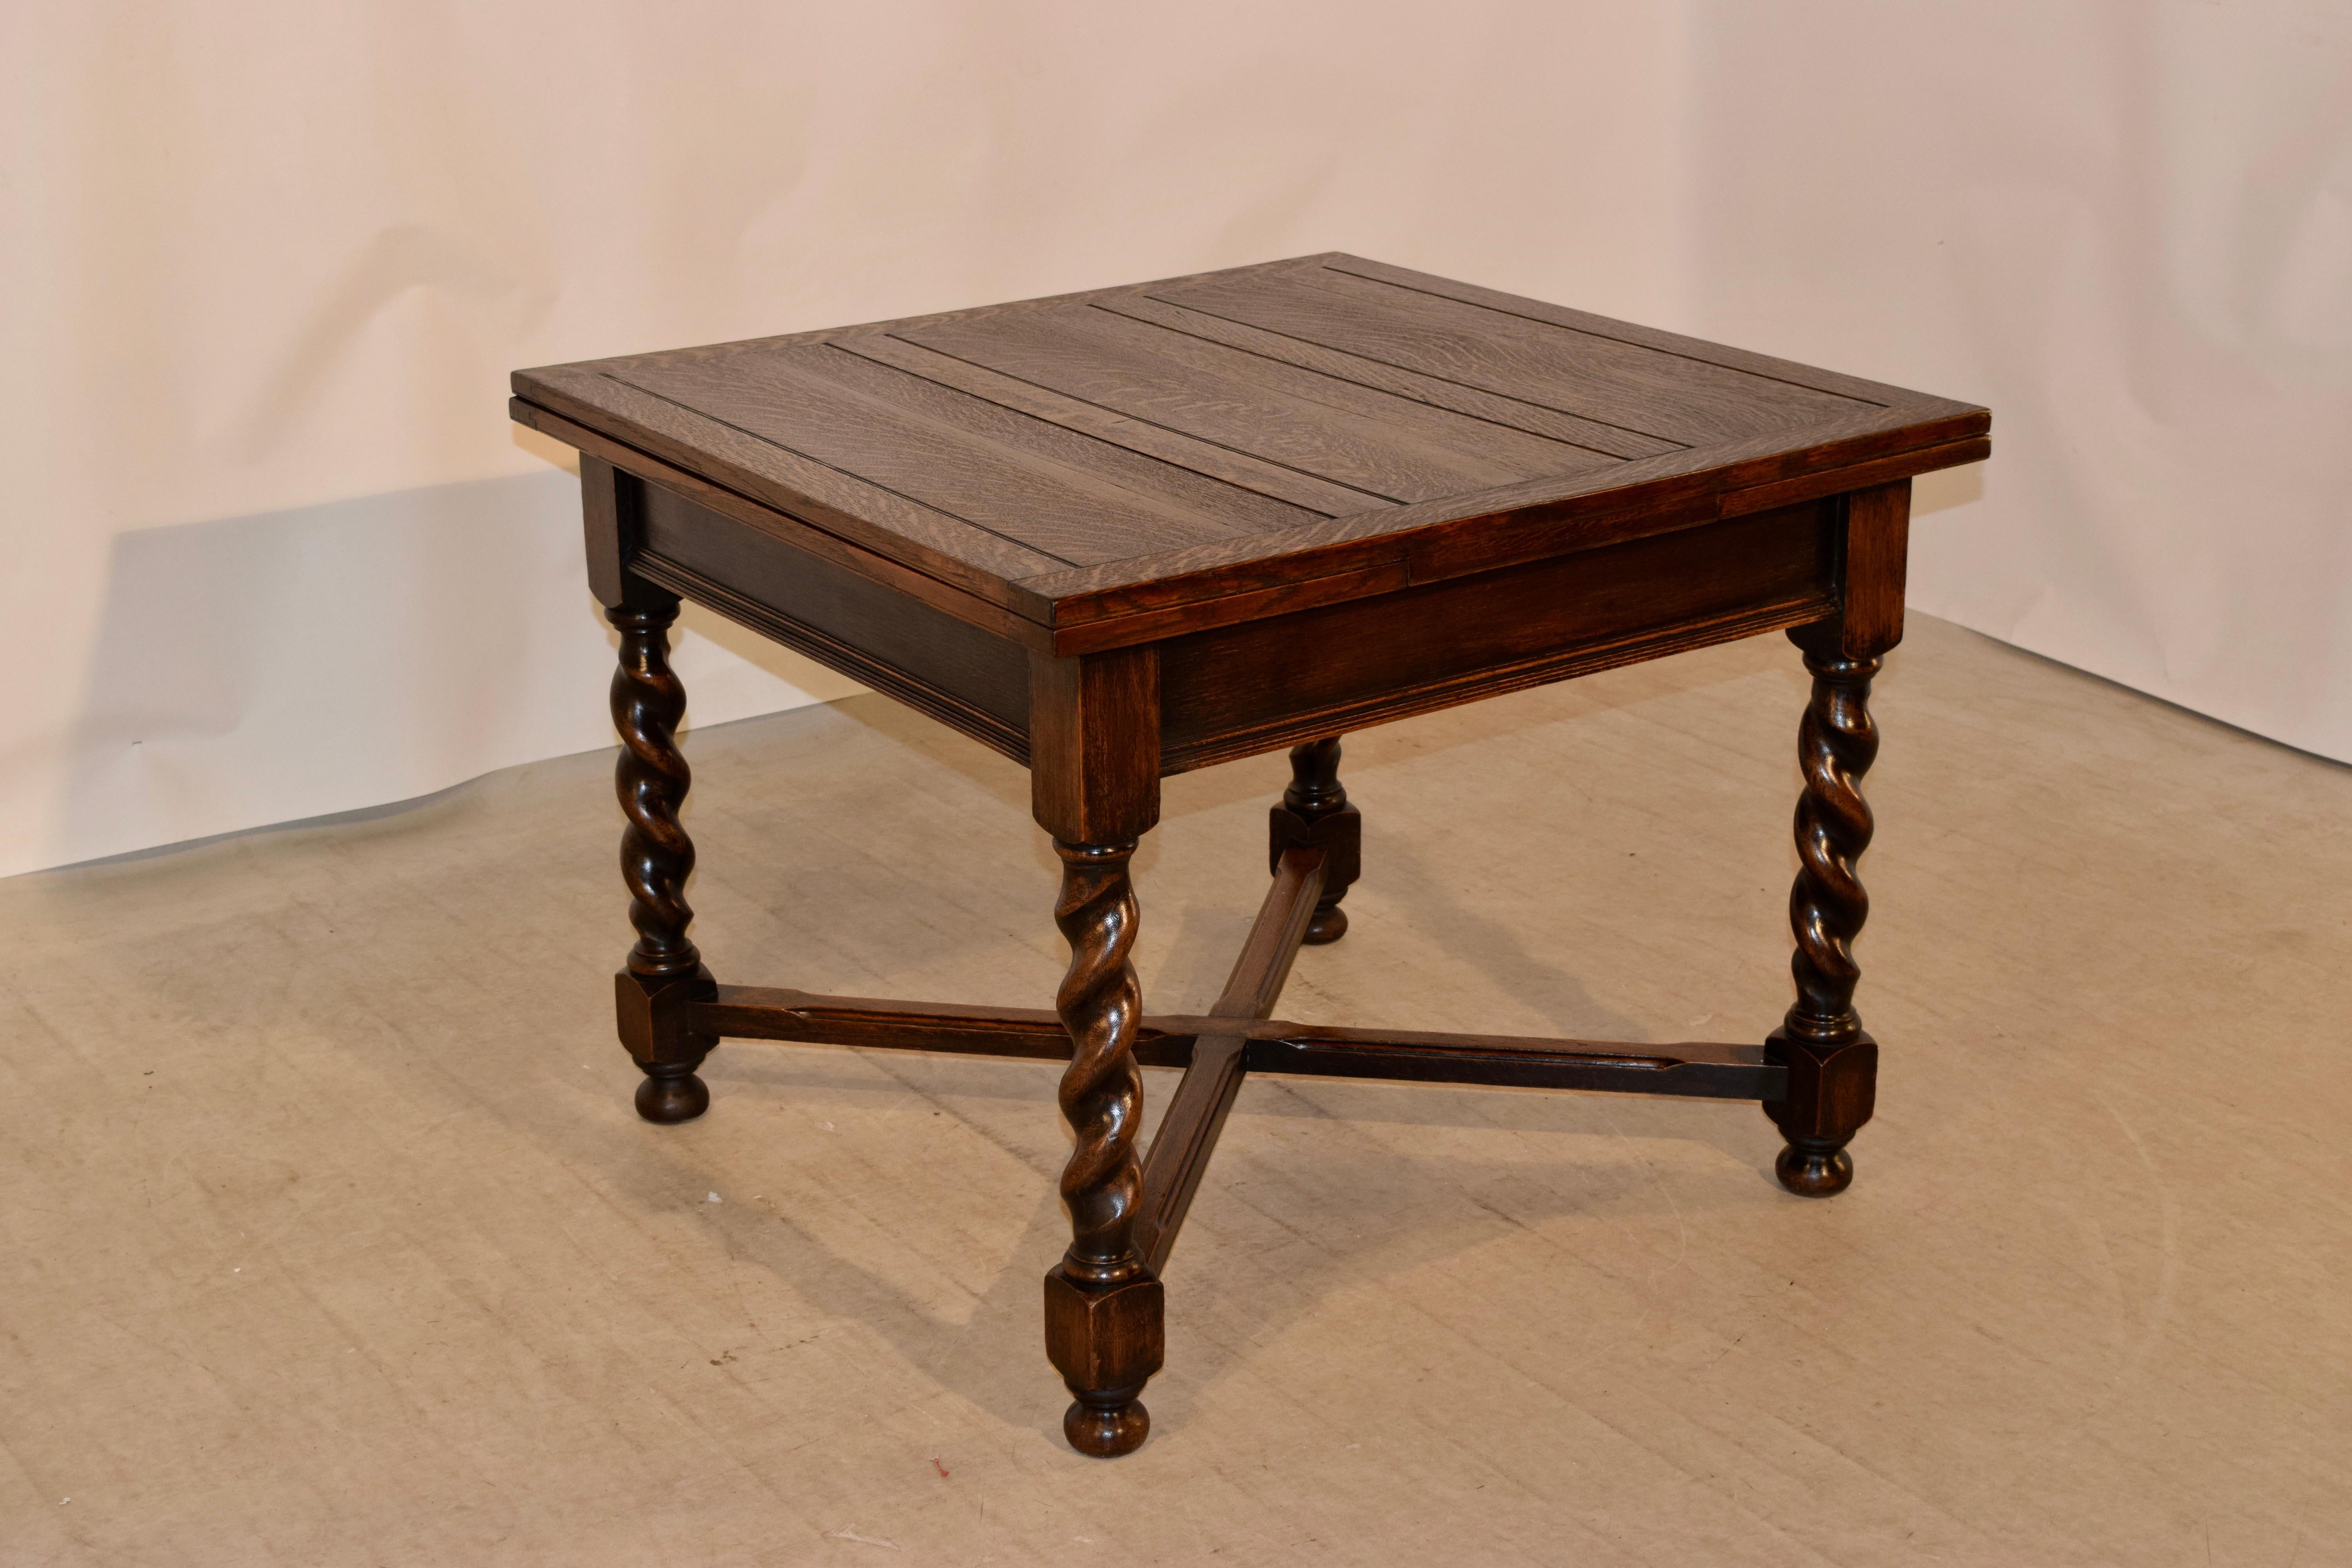 English oak table with draw leaves, circa 1900. The top and pull out leaves are paneled, and are supported on a base with a simple apron which has a molded edge following down to hand turned thick barley twist legs, joined by simple cross stretchers